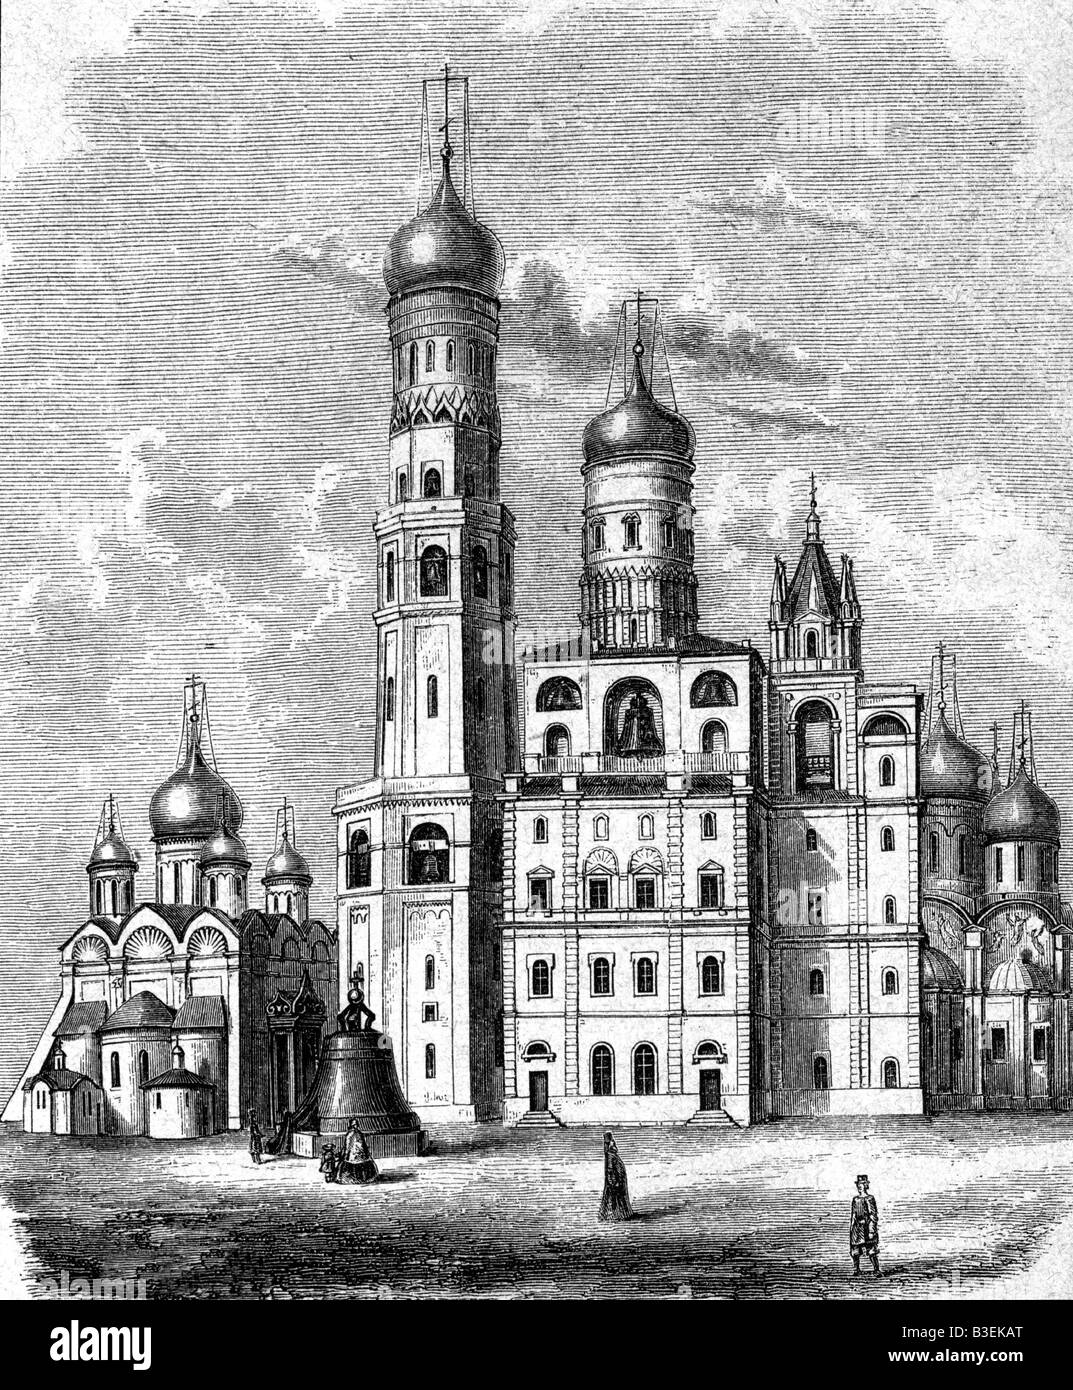 geography / travel, Russia, Moscow, churches, Ivan Velicki convent, original engraving, 19th century, historic, historical, Europe, church, architecture, onion dome, people, Stock Photo